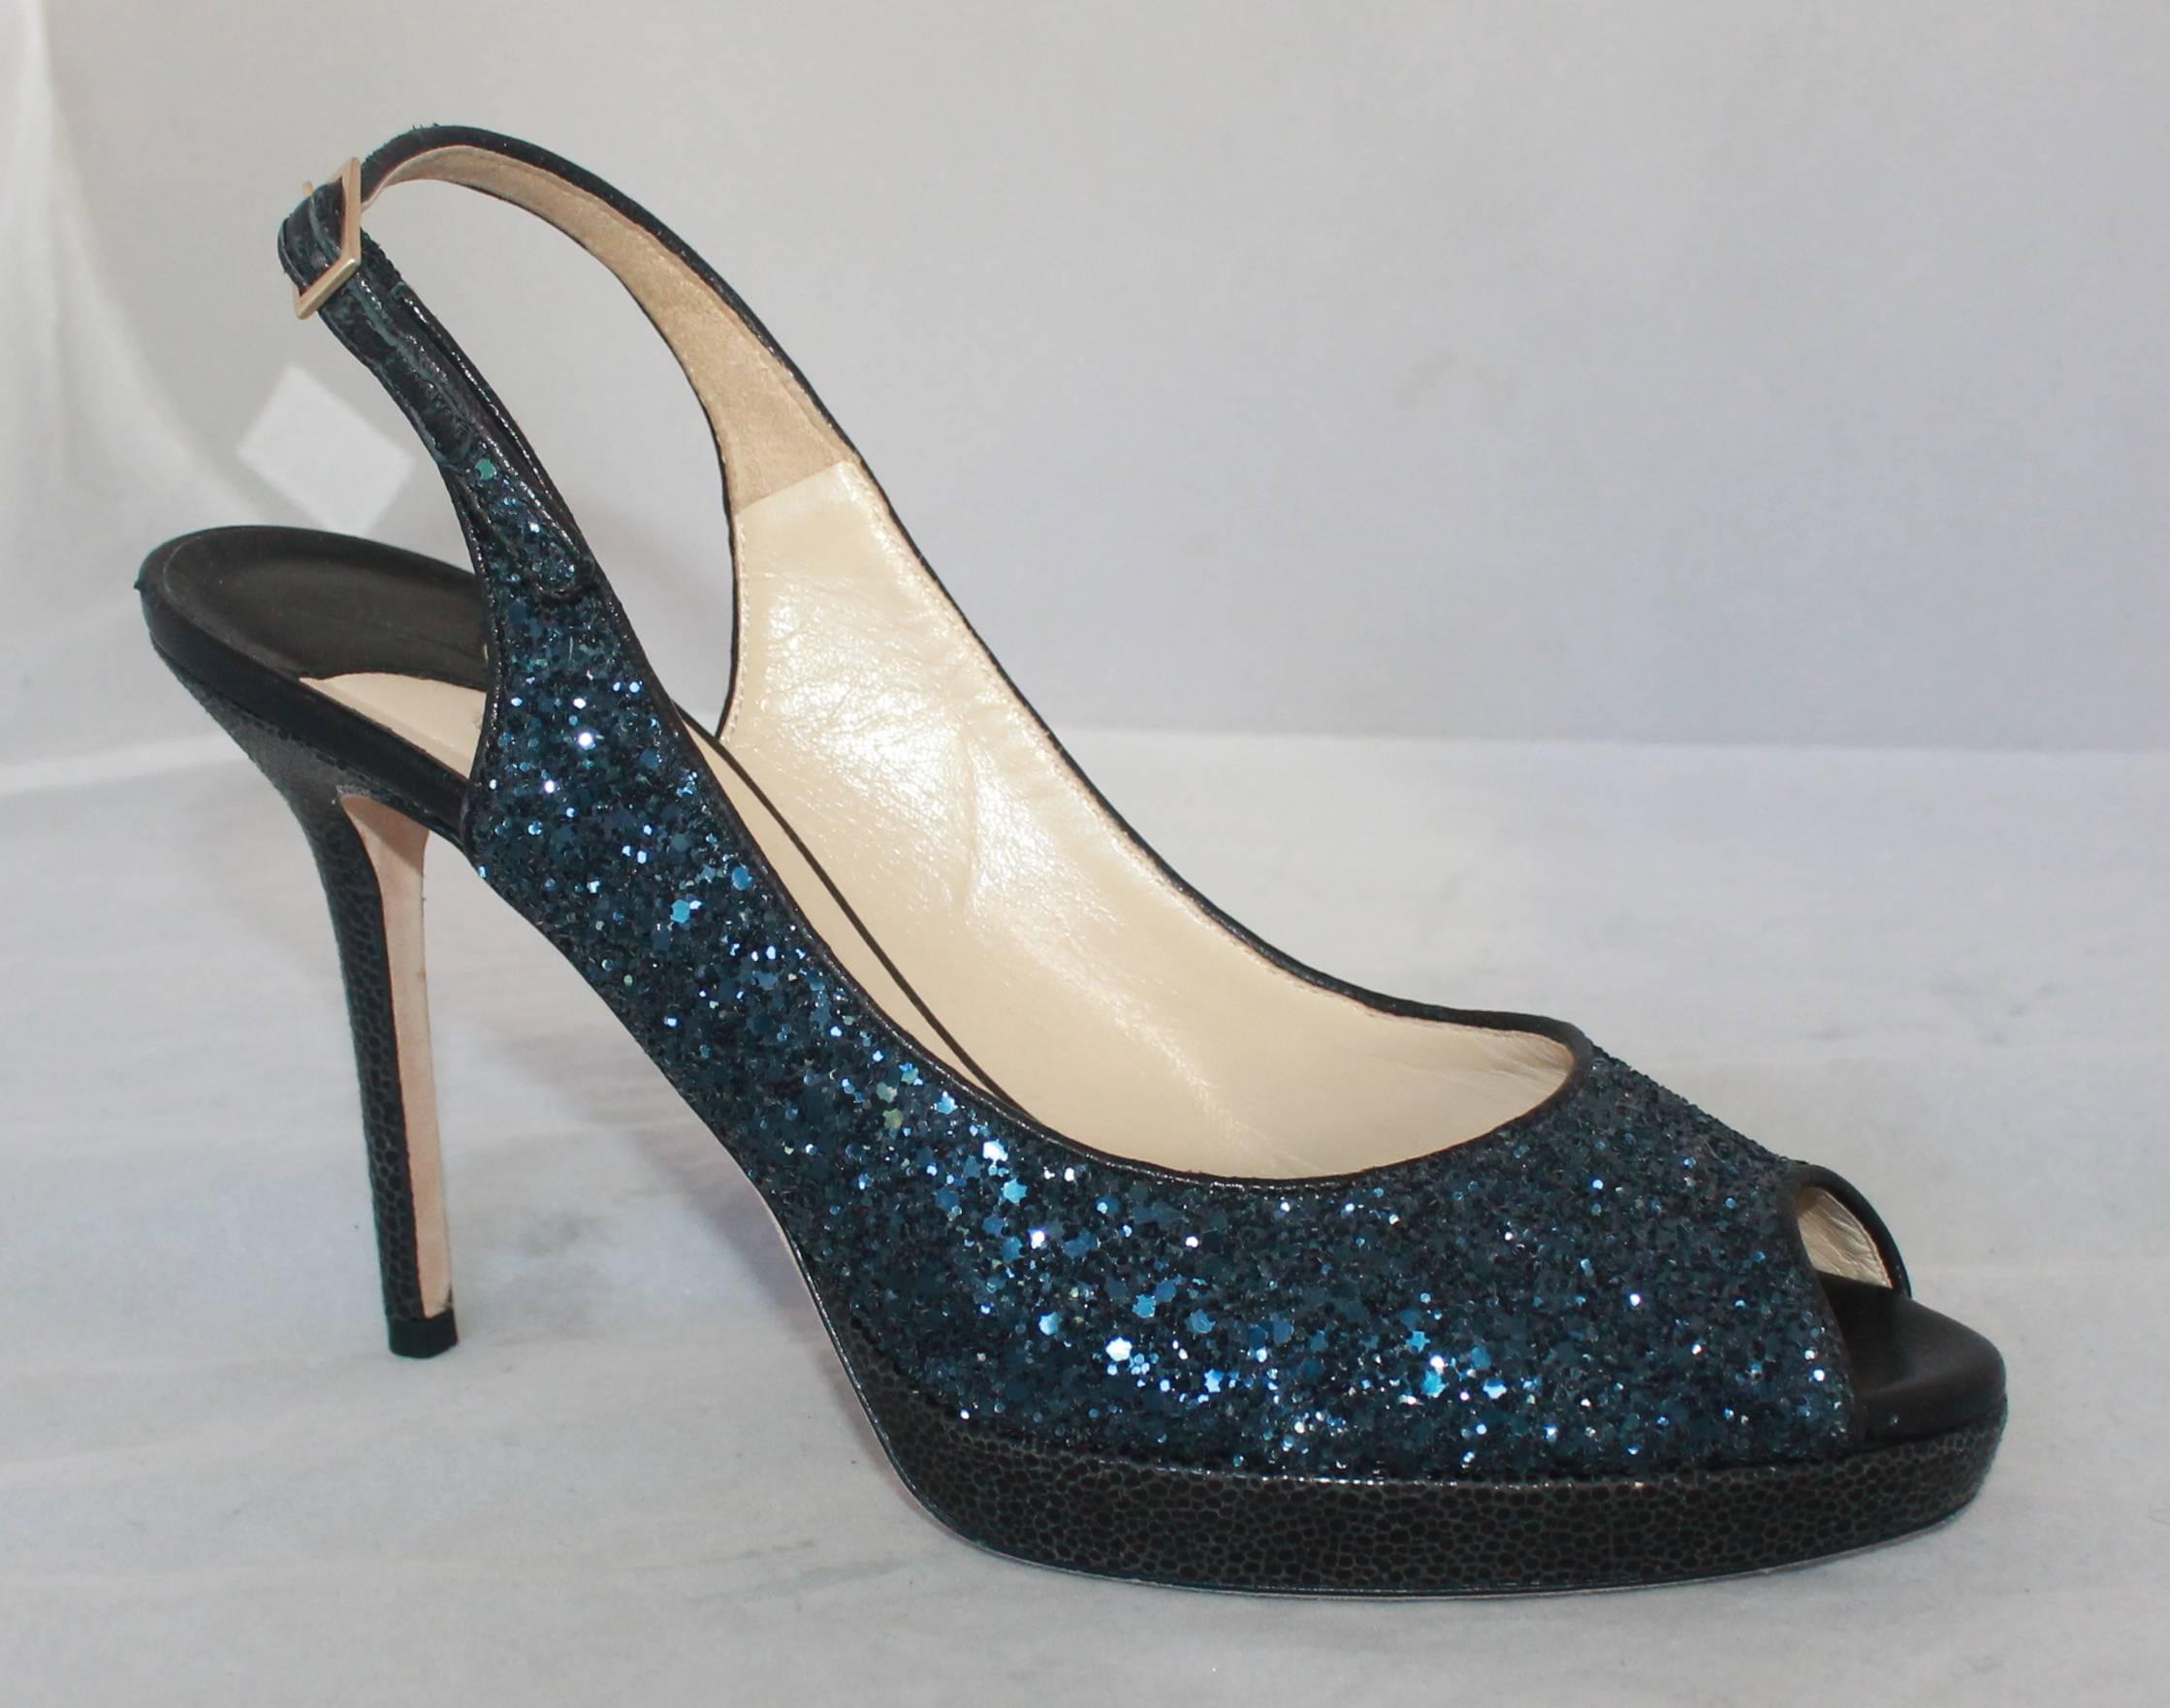 Jimmy Choo Navy Glitter Peep Toe Slingback Heels - 40

These heels are in excellent condition but do have very minor bottom wear. They are covered in navy glitter and have a cracked-style fabric on the heel. These shoes also have a matching clutch